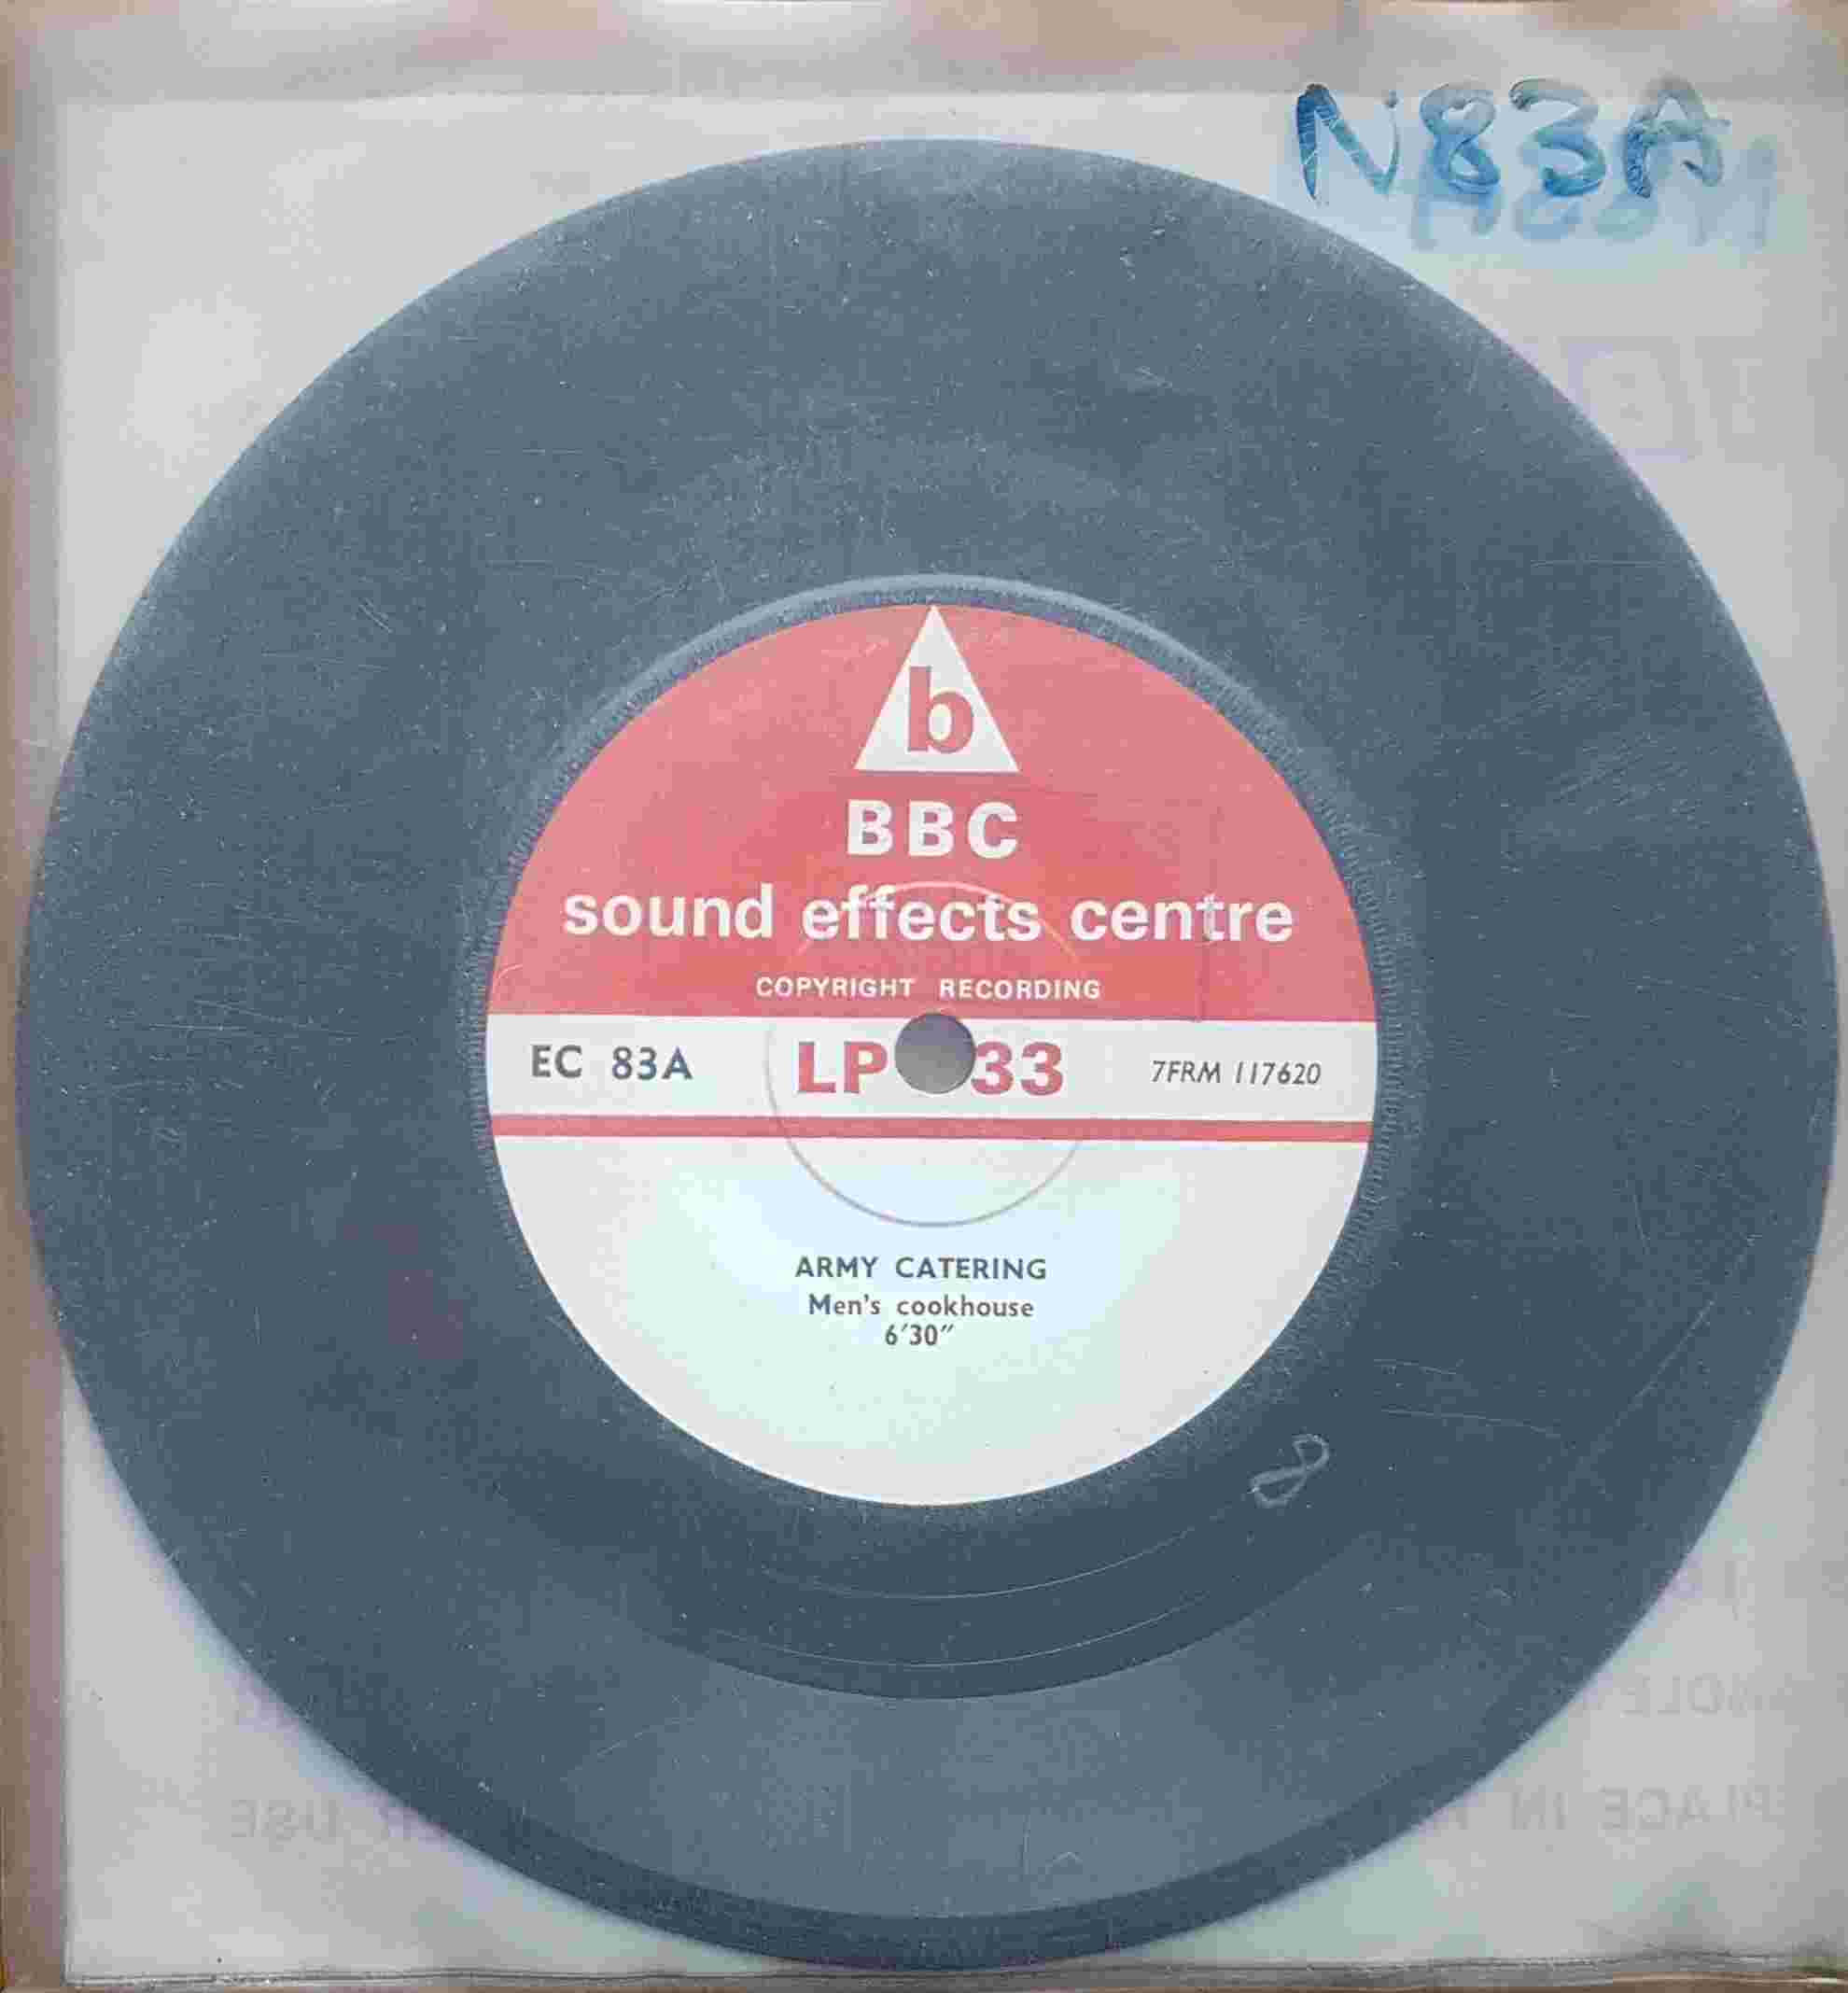 Picture of EC 83A Army catering by artist Not registered from the BBC records and Tapes library